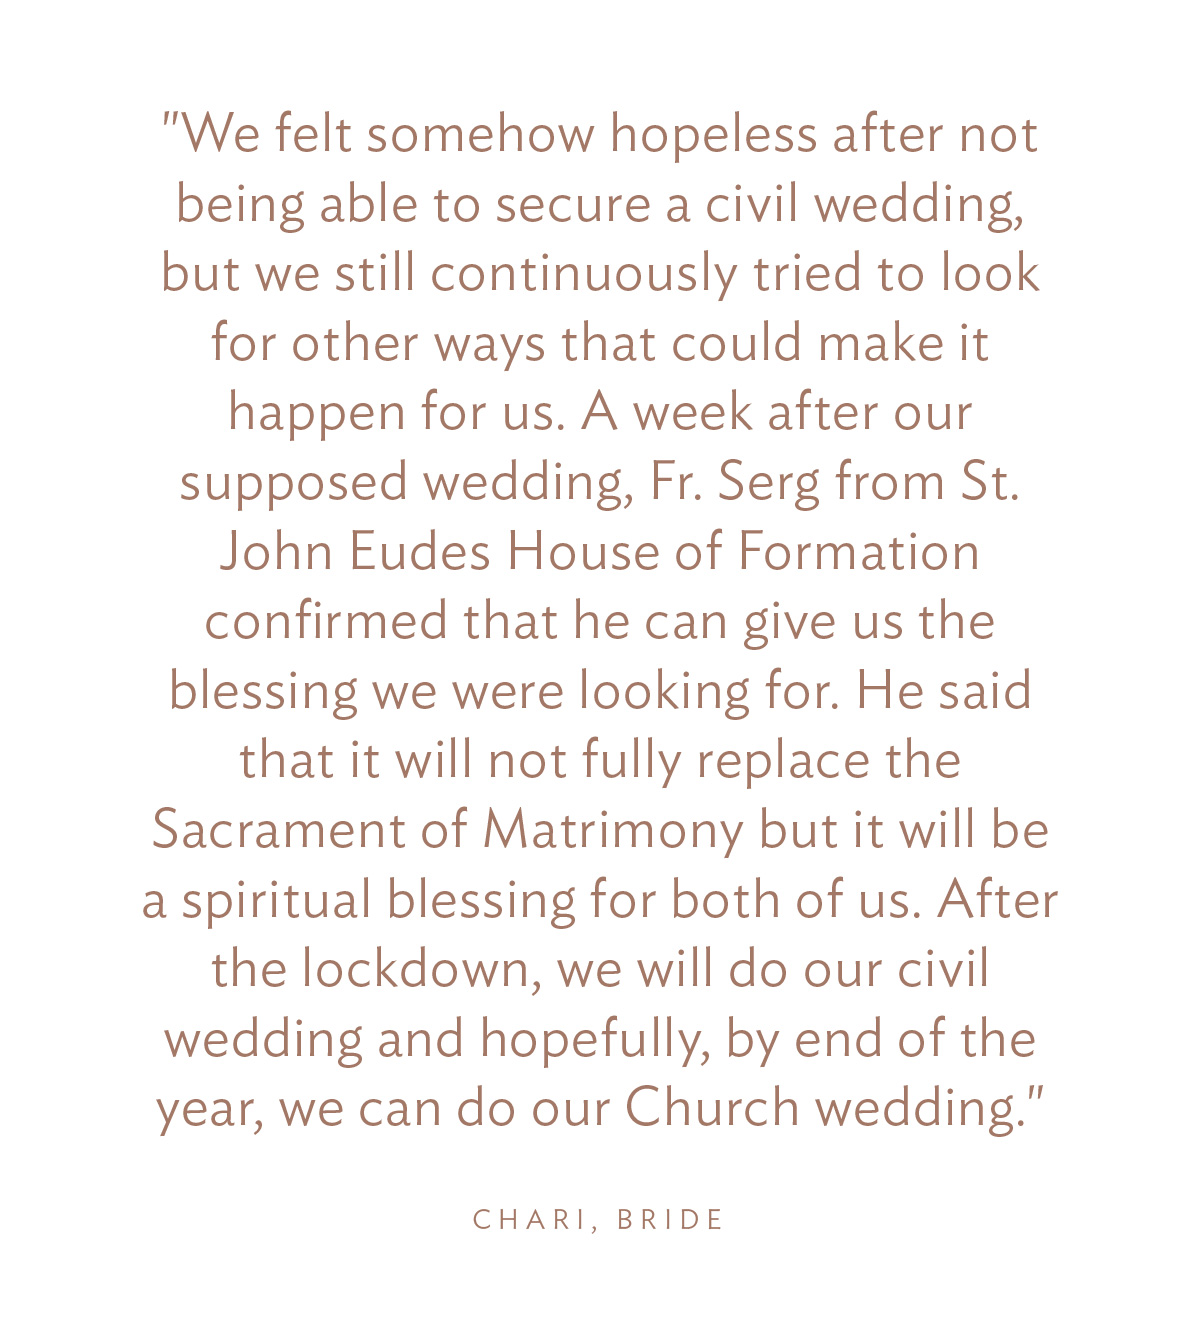 "We felt somehow hopeless after not being able to secure a civil wedding, but we still continuously tried to look for other ways that could make it happen for us. A week after our supposed wedding, Fr. Serg confirmed that he can give us the blessing we were looking for. He said that it will not fully replace the Sacrament of Matrimony but it will be a spiritual blessing for both of us. After the lockdown, we will do our civil wedding and hopefully, by end of the year, we can do our Church wedding."